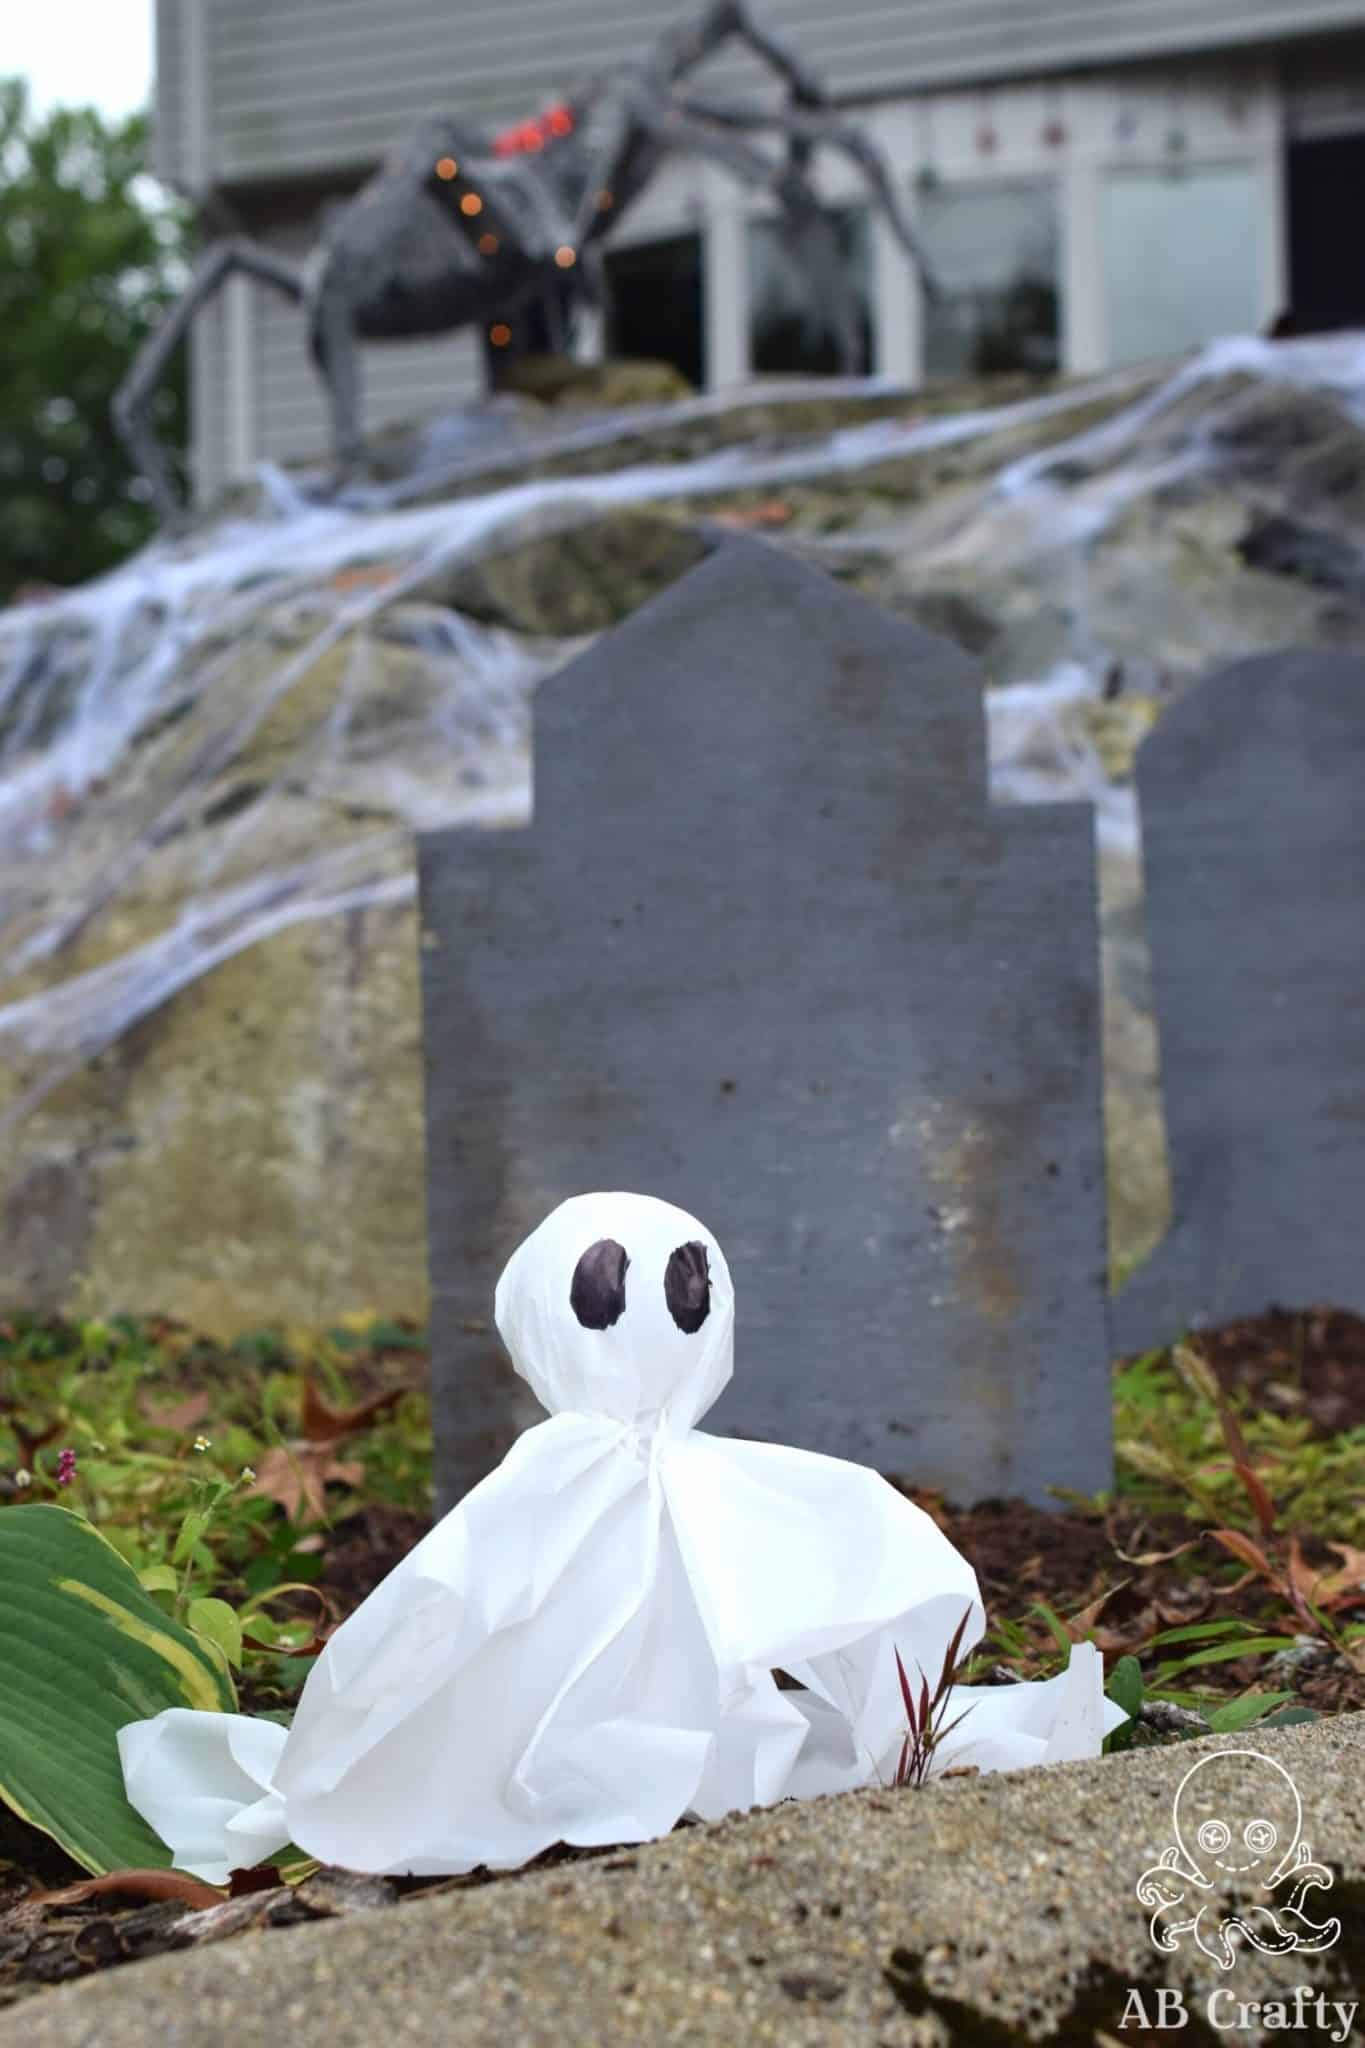 DIY ghost light in front of a diy gravestone in front of an animatronic spider on top of a large rock in front of a house